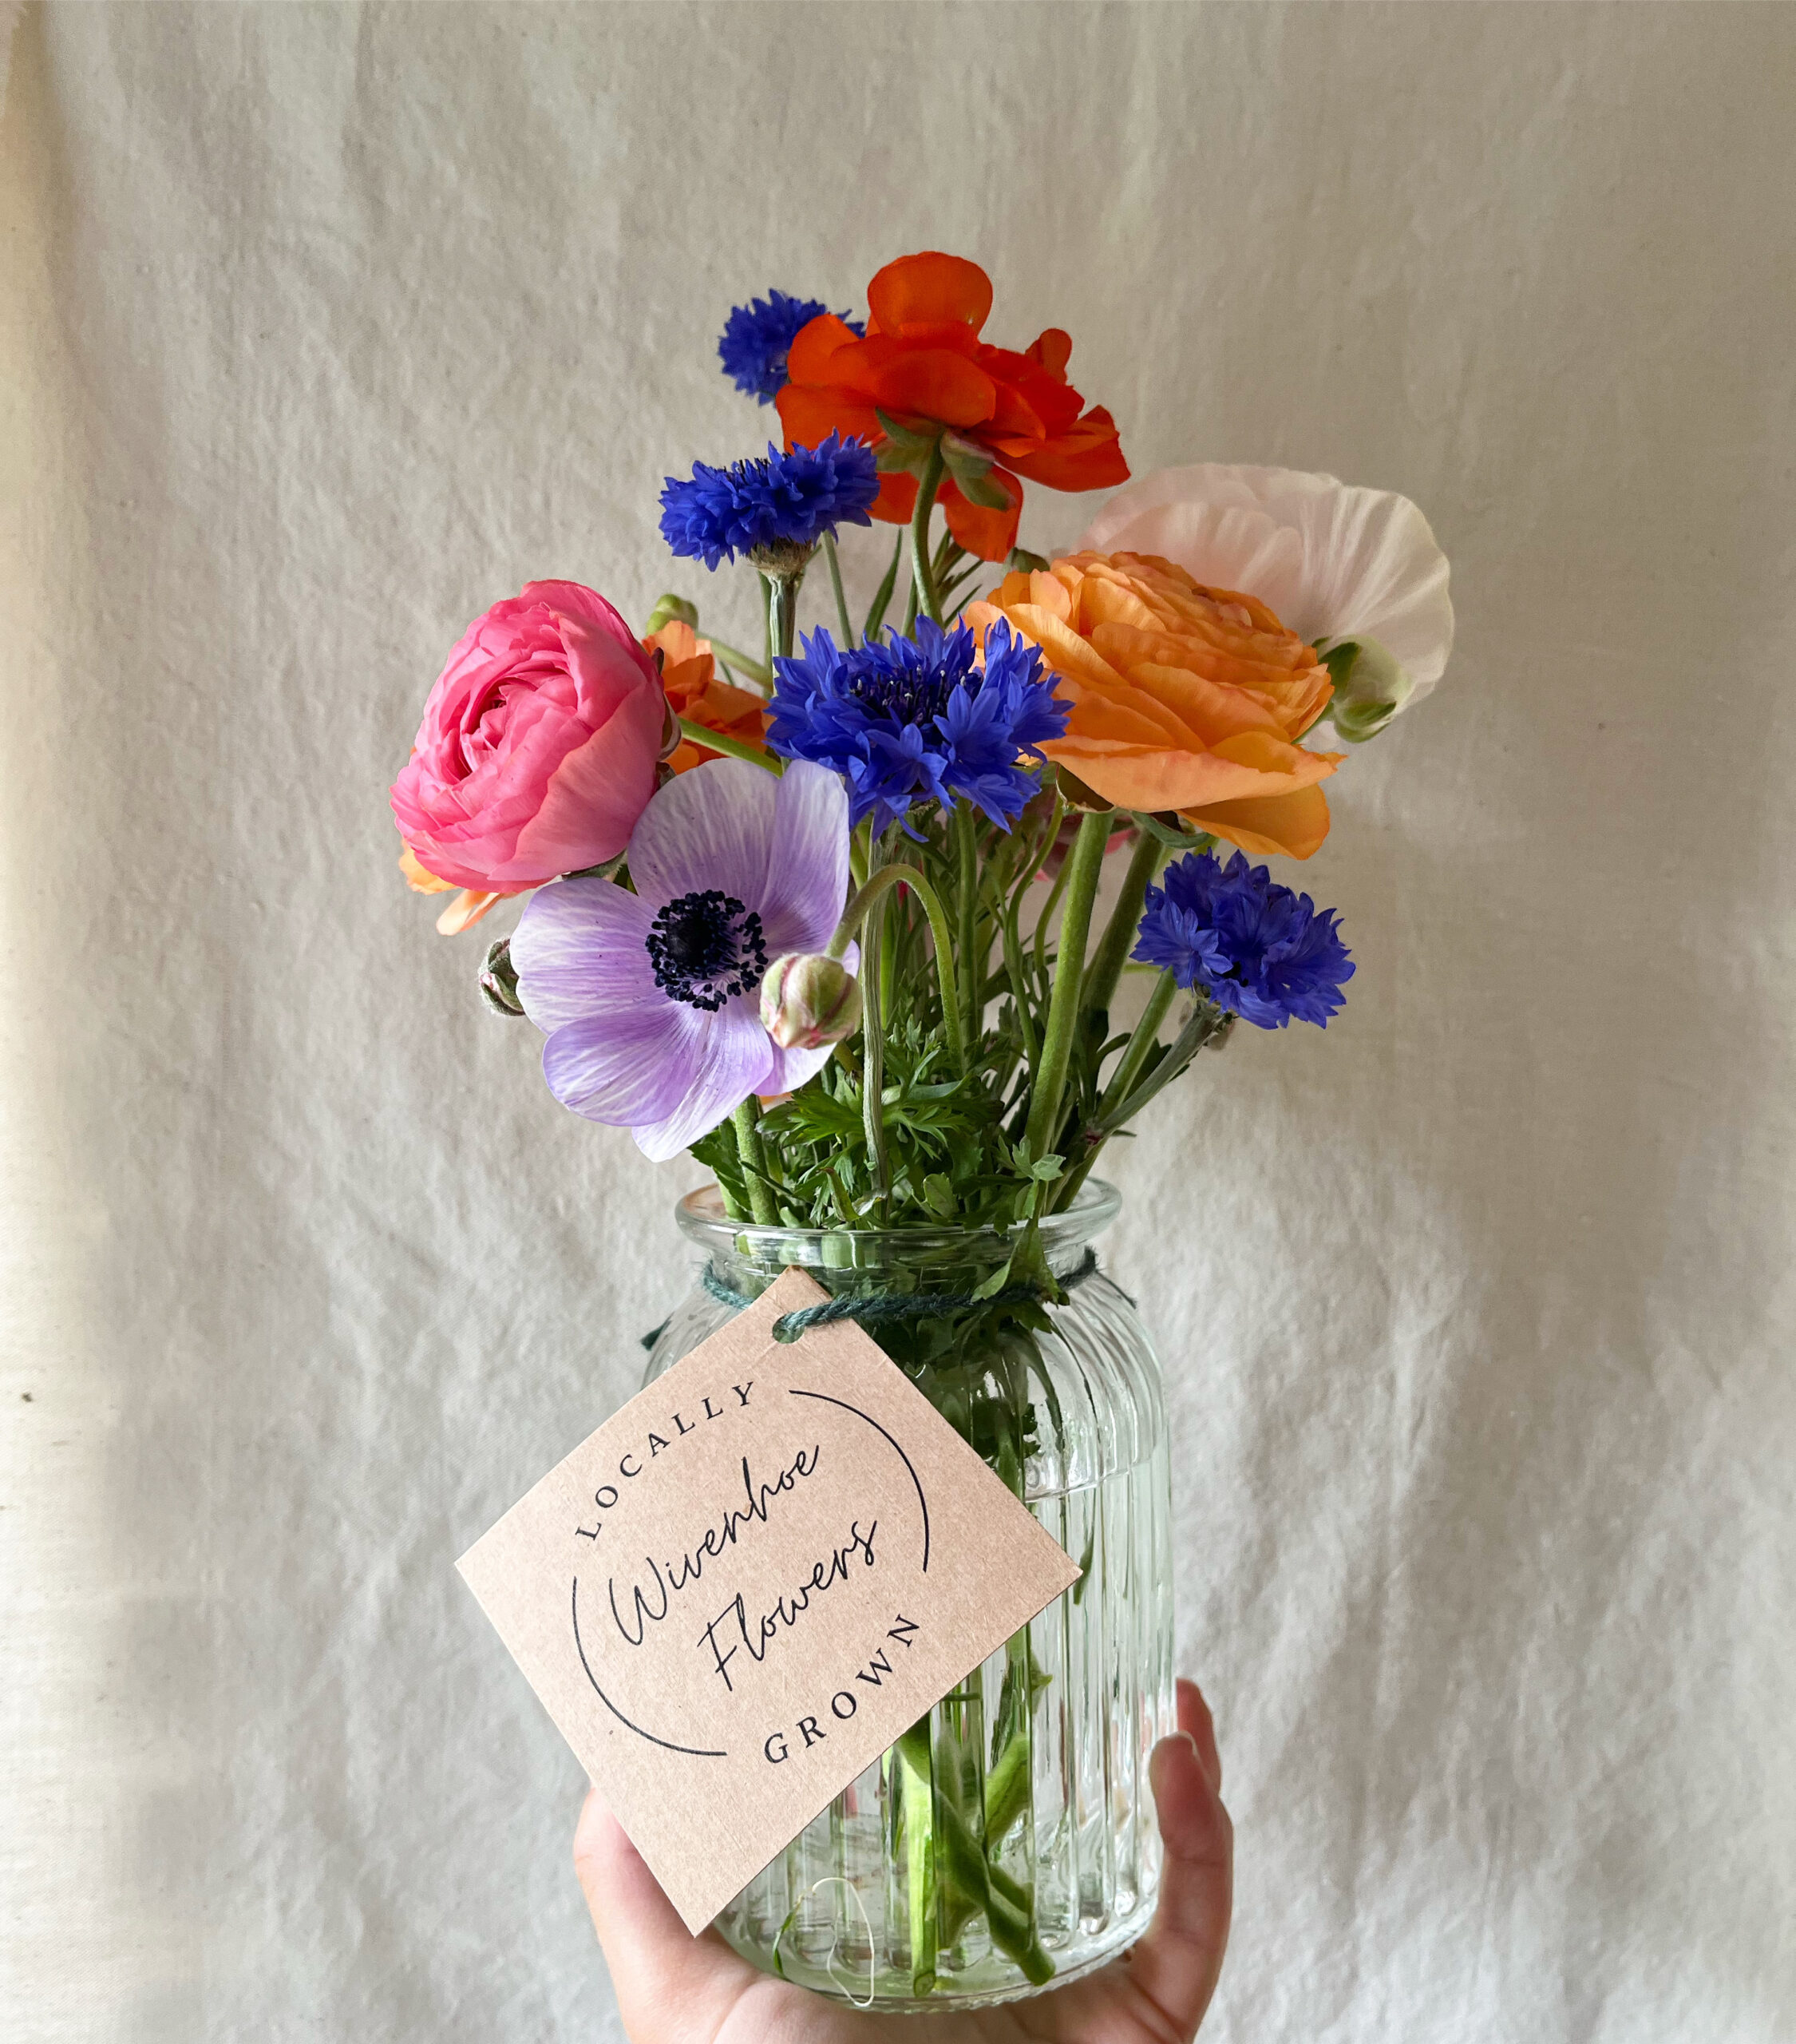 A jam jar of spring blooms from Wivenhoe Flowers, featuring anemones, ranunculus, and cornflowers.